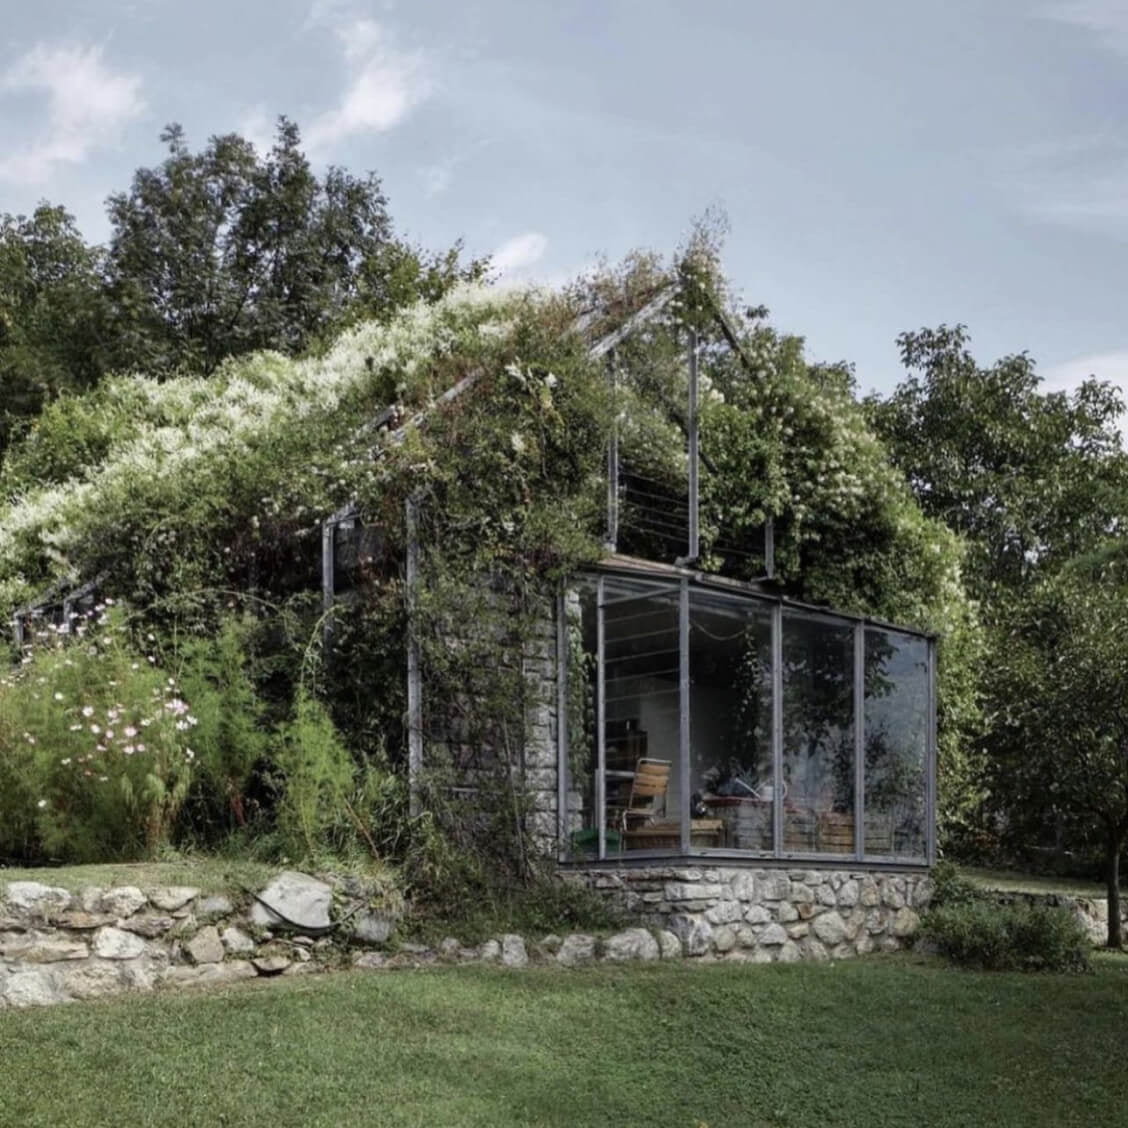 Check Out the Dreamiest Garden House We've Ever Seen